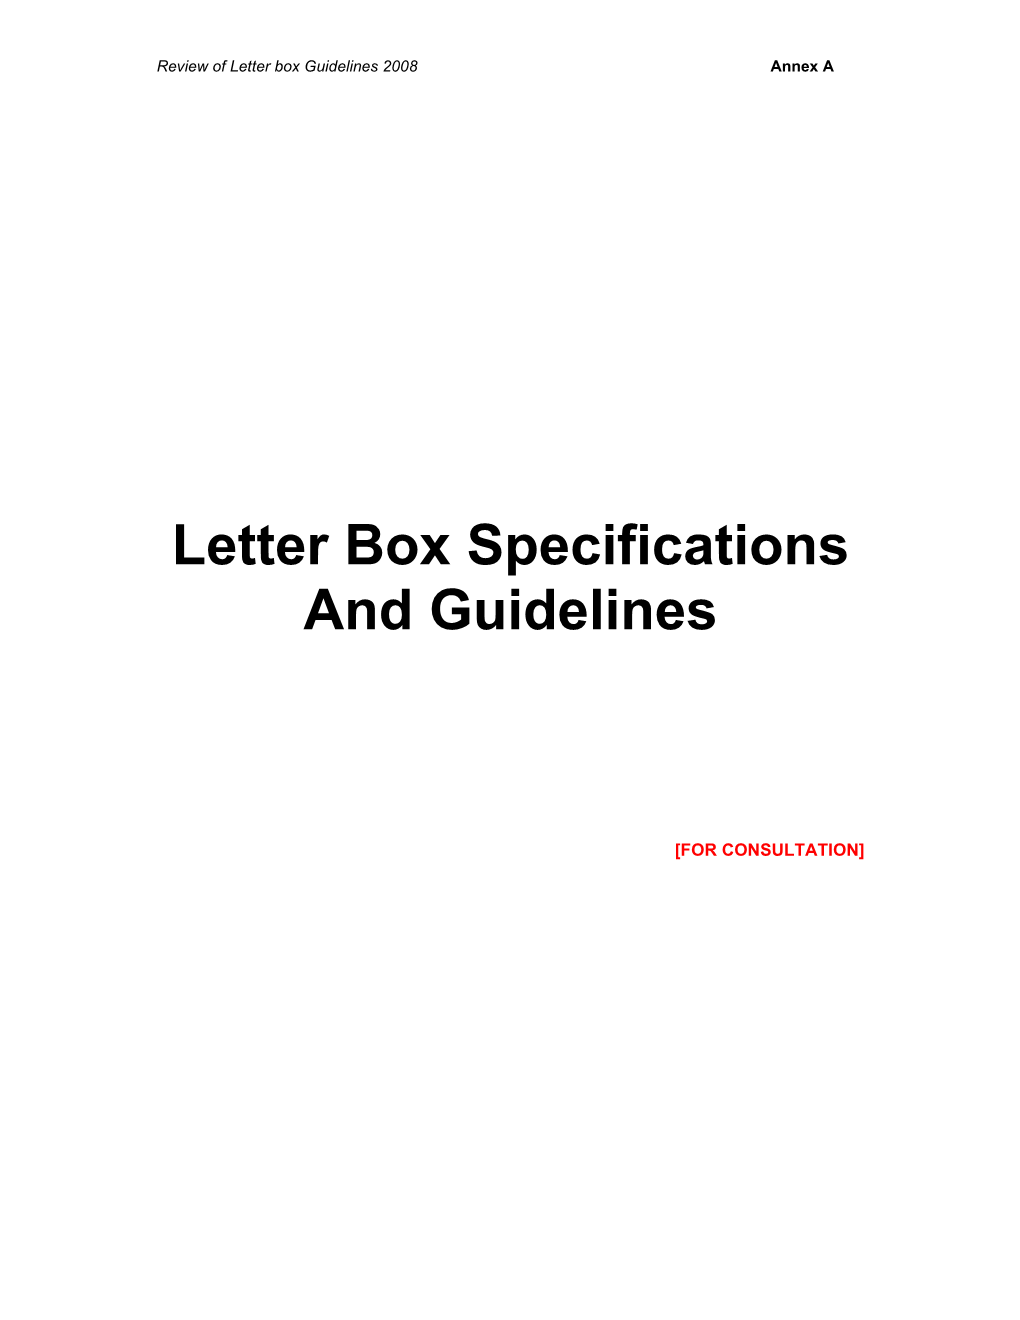 Letter Box Specifications and Guidelines